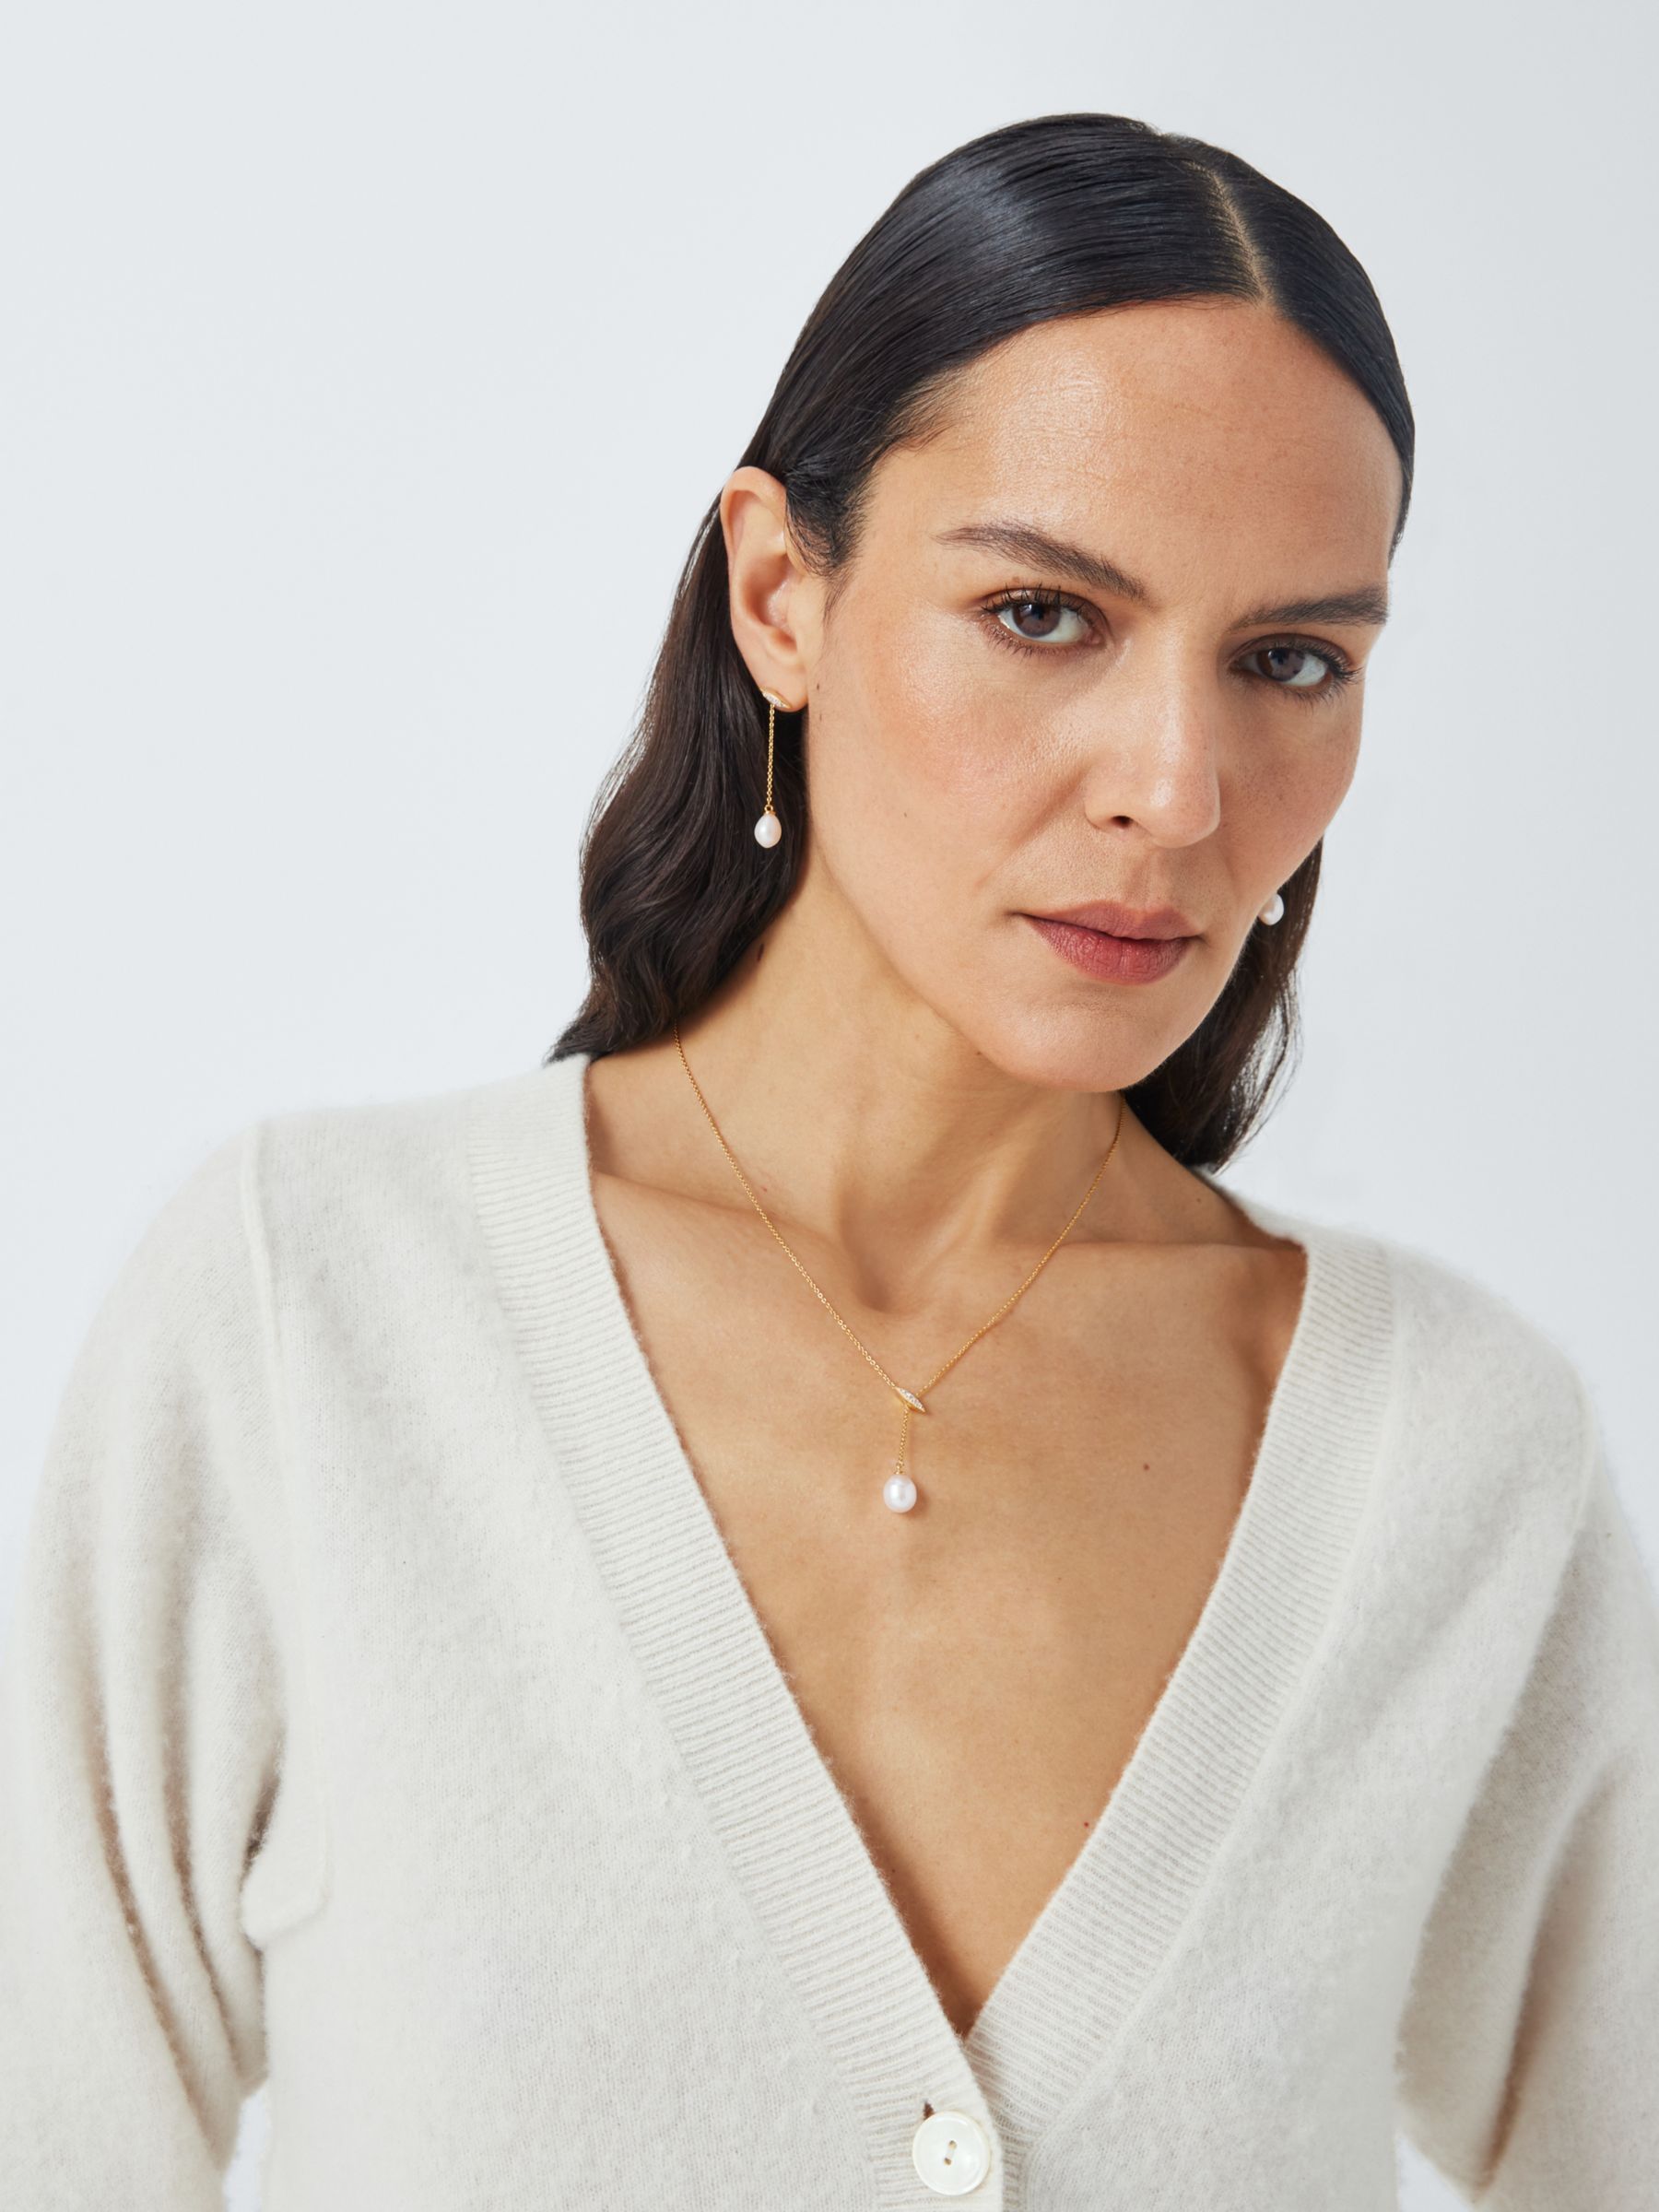 Buy Lido Oval Freshwater Pearl Drop Necklace Online at johnlewis.com